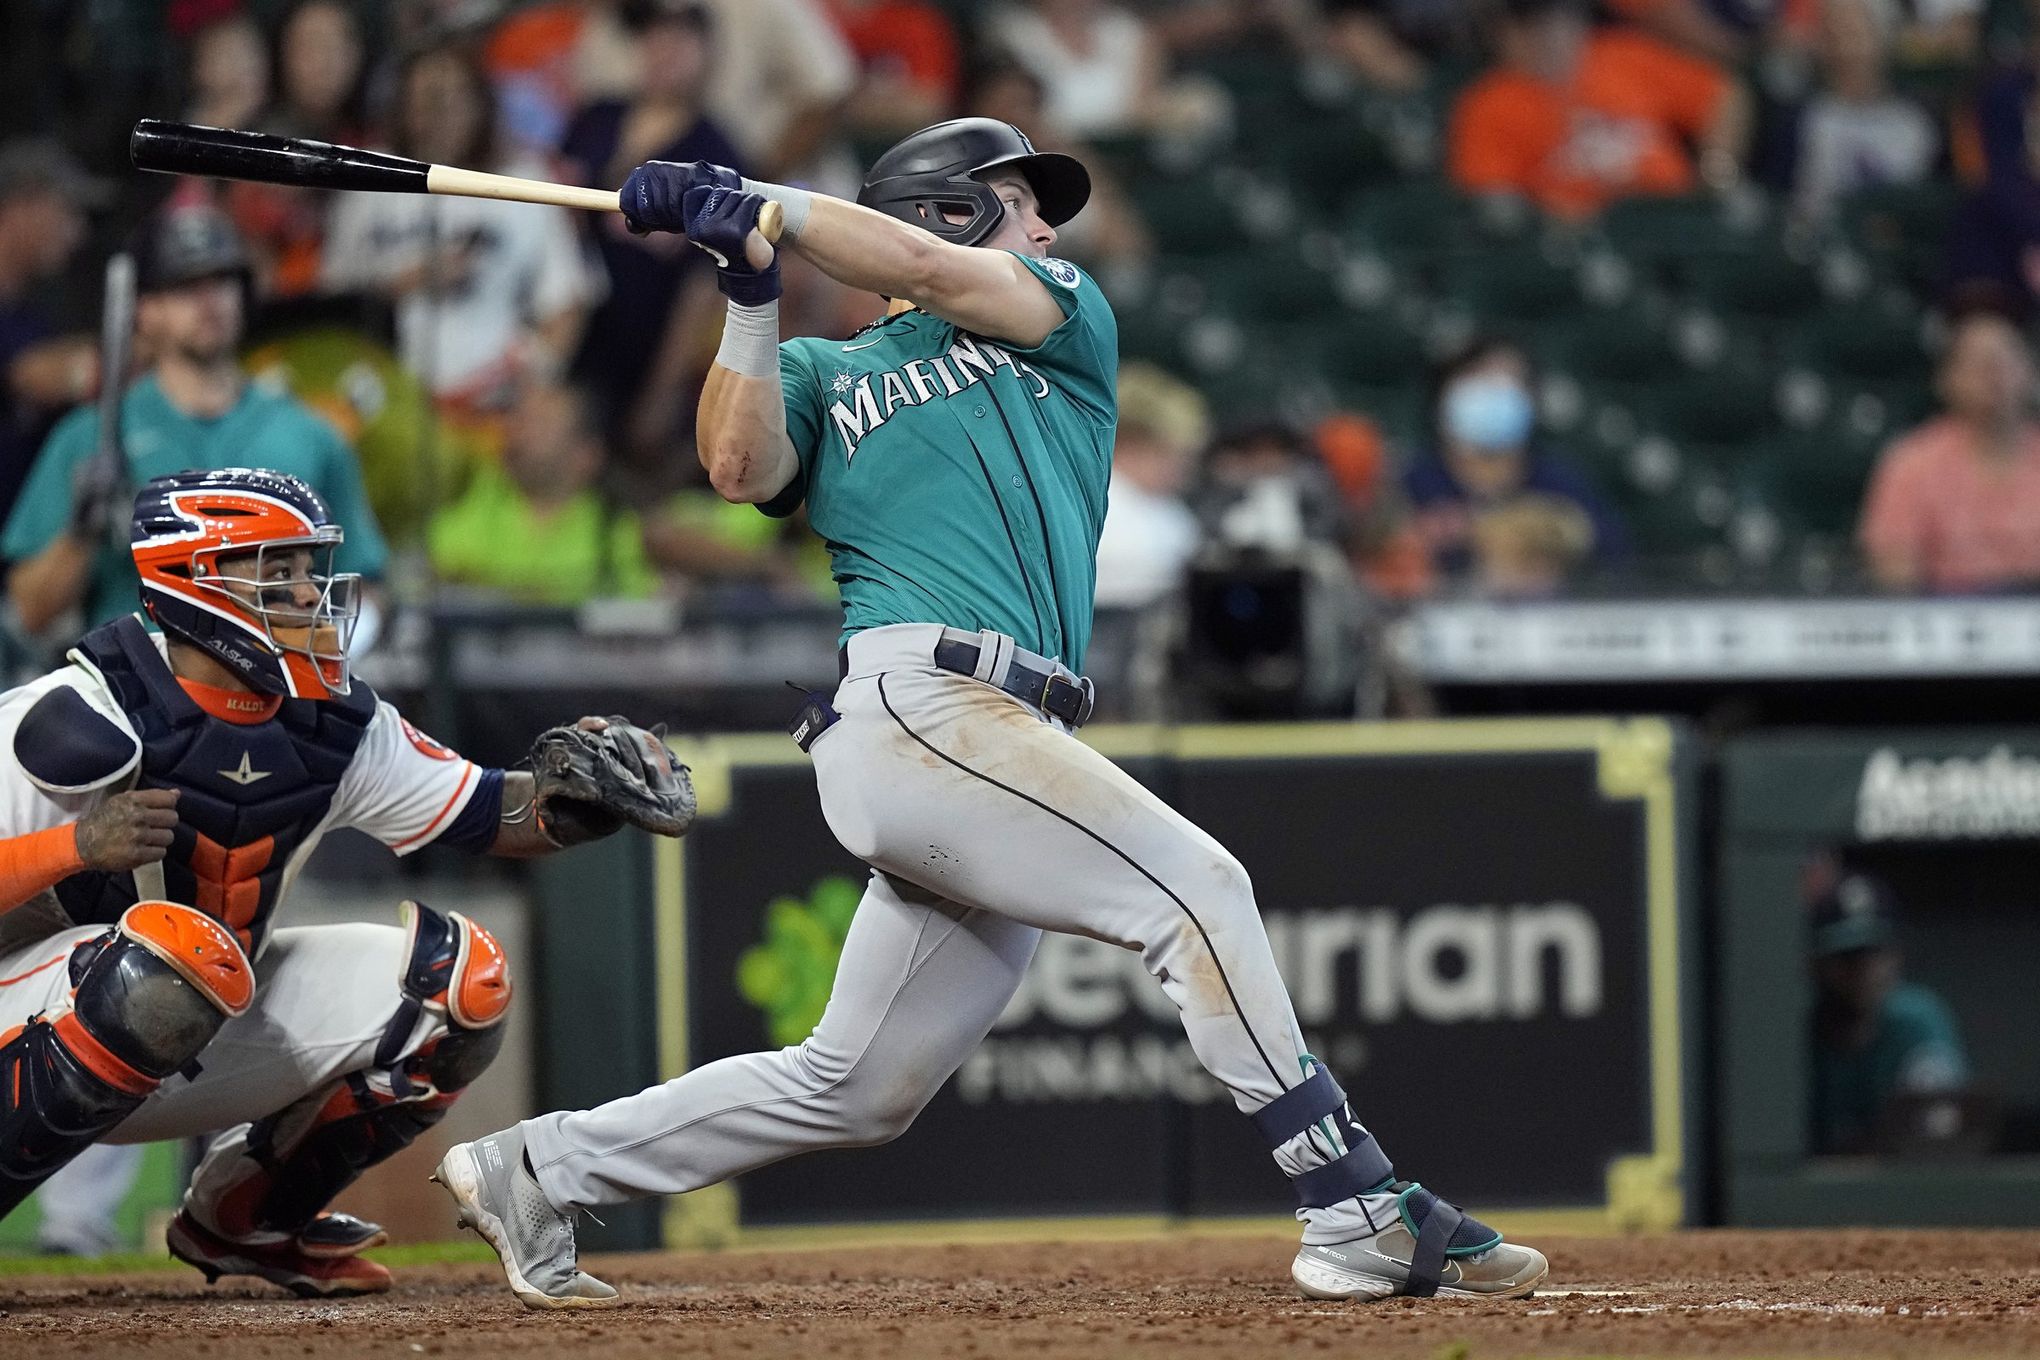 Mariners come up with late rally to win finale over Astros and